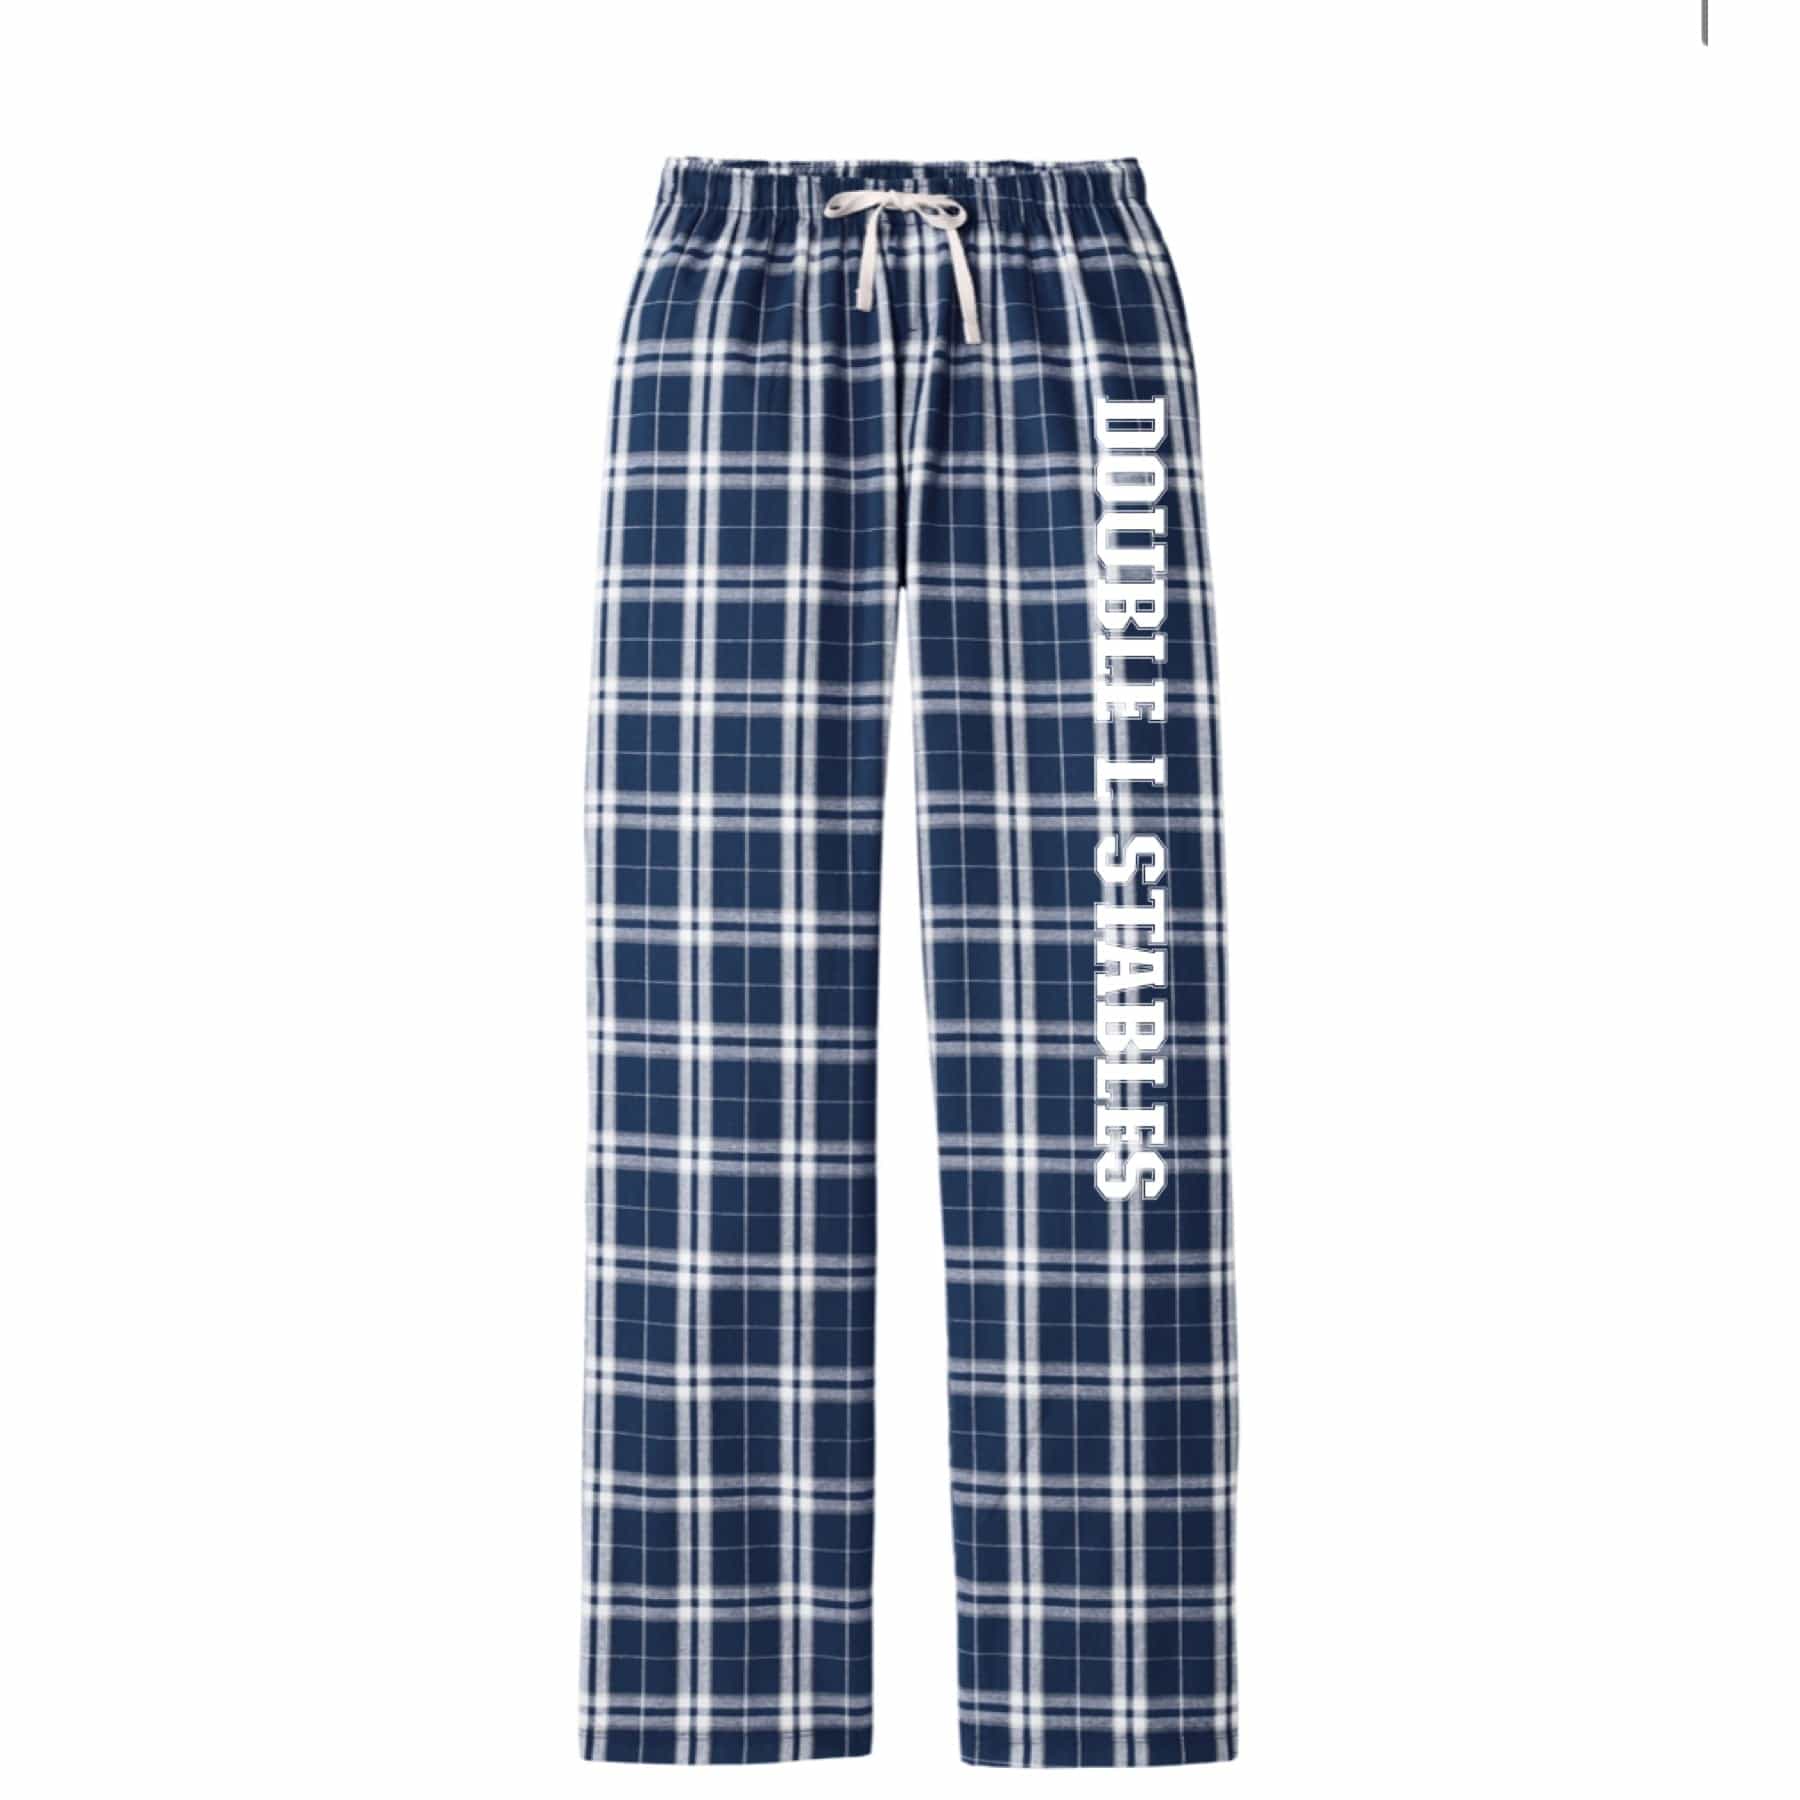 Equestrian Team Apparel Double L Stables Flannel Pants equestrian team apparel online tack store mobile tack store custom farm apparel custom show stable clothing equestrian lifestyle horse show clothing riding clothes horses equestrian tack store